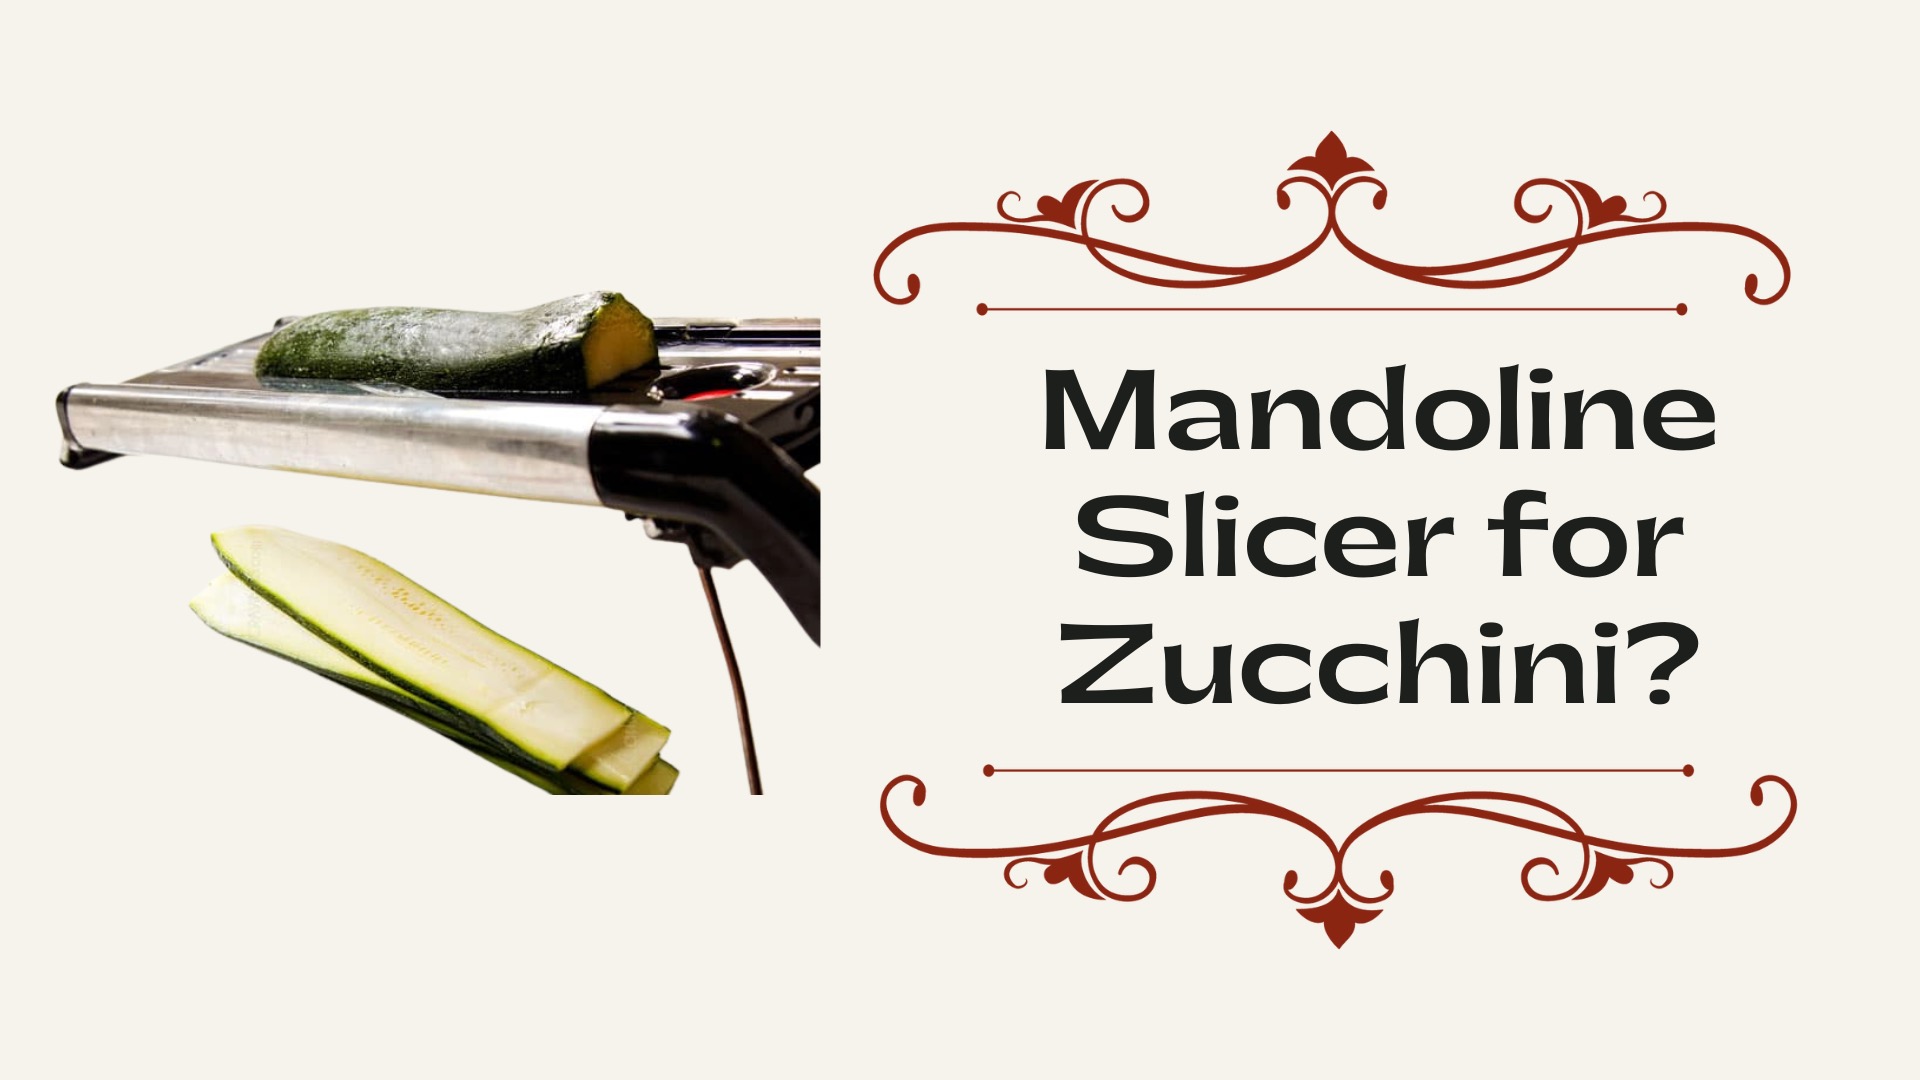 How to Use a Mandoline Slicer for Zucchini?